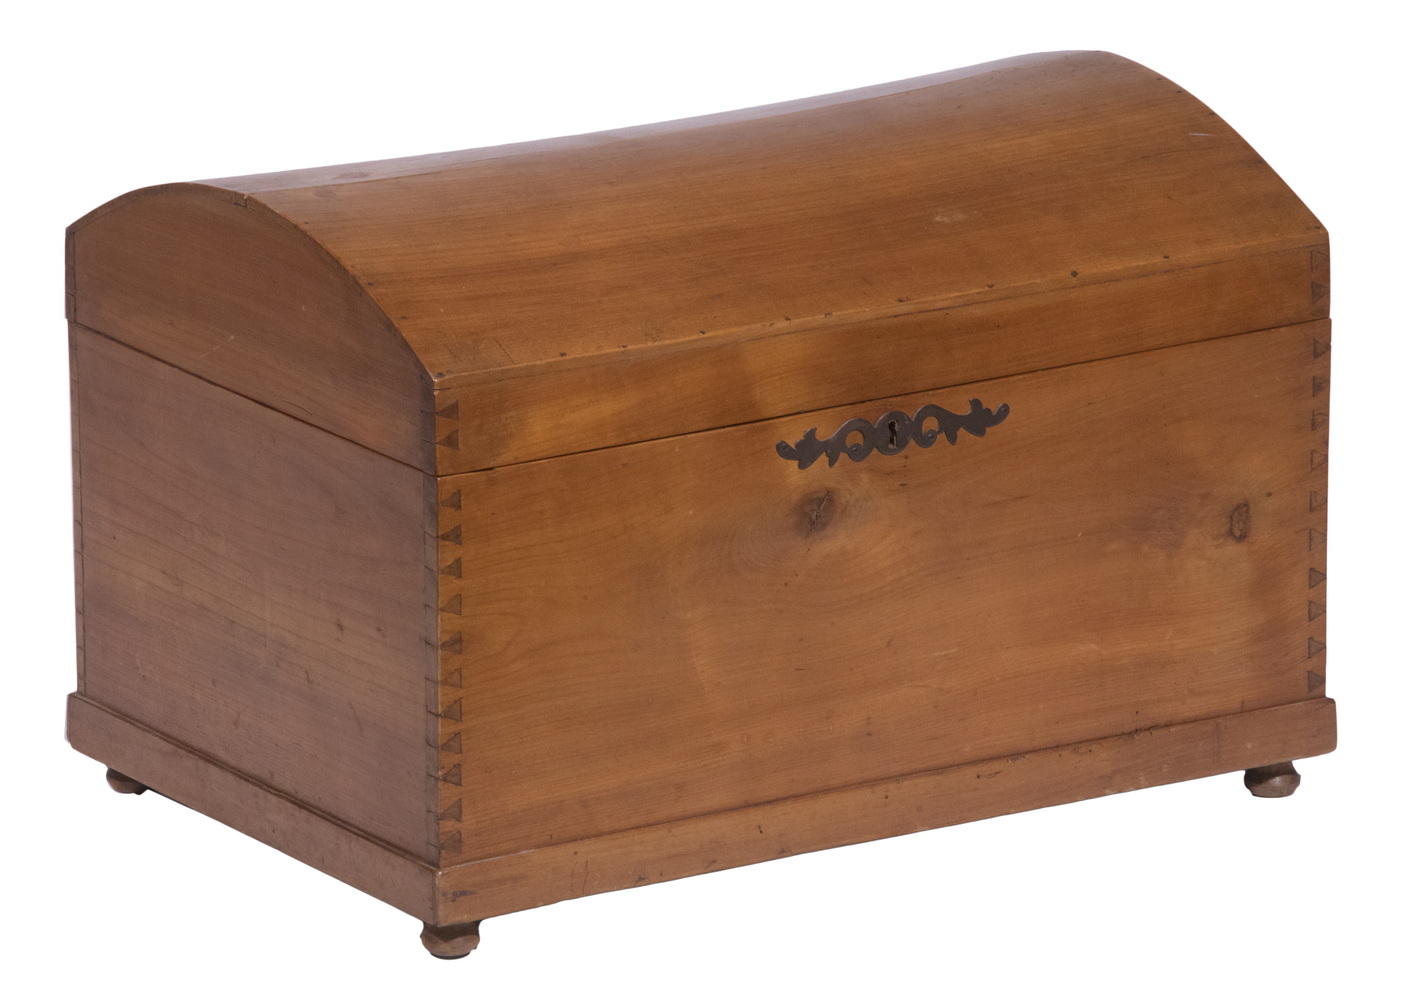 DOME TOP STORAGE TRUNK Soft Wood 302910